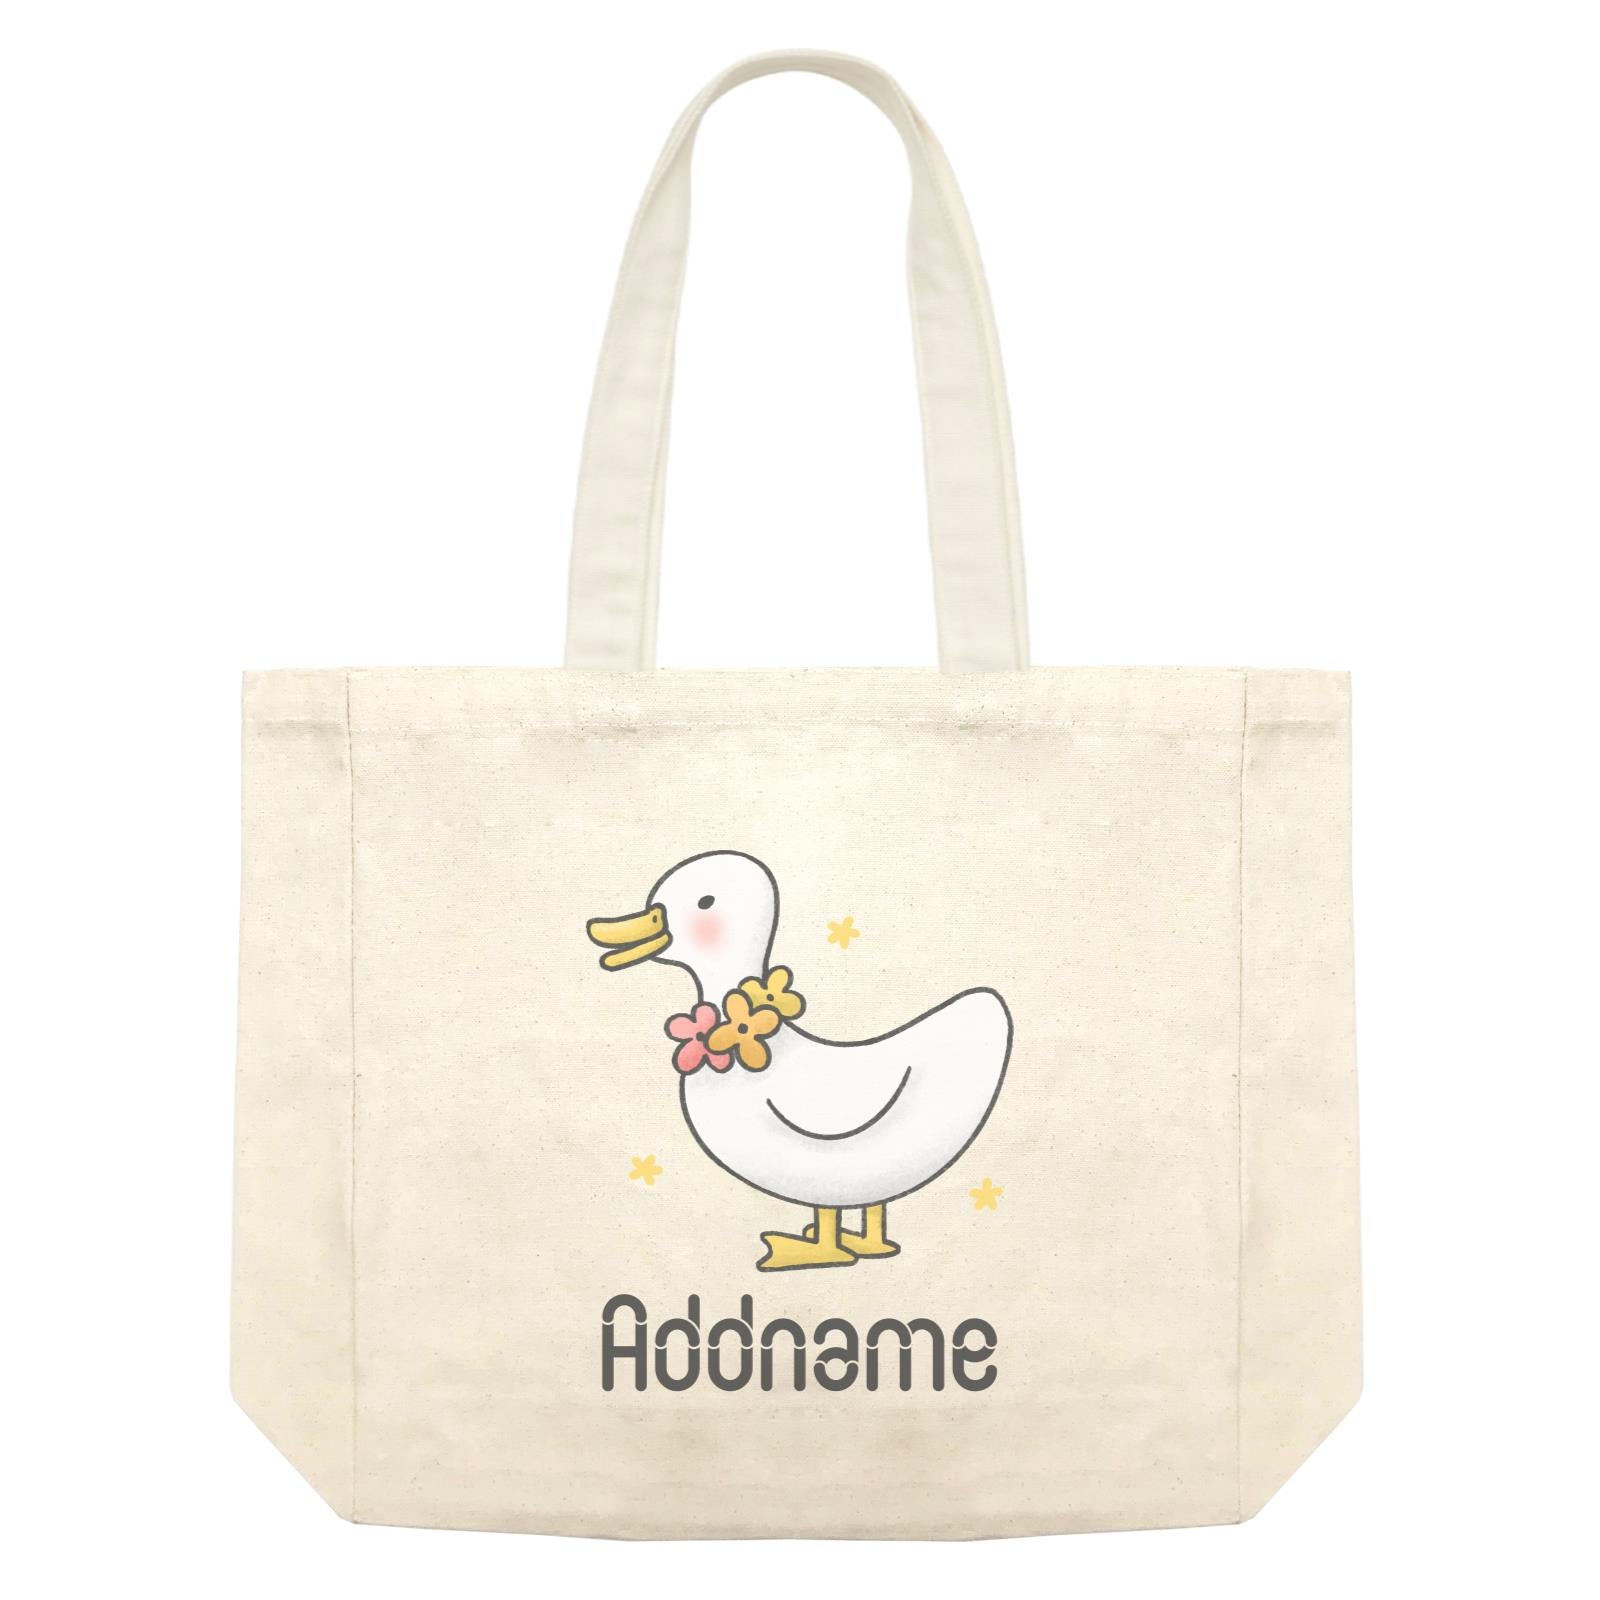 Cute Hand Drawn Style Duck Addname Shopping Bag